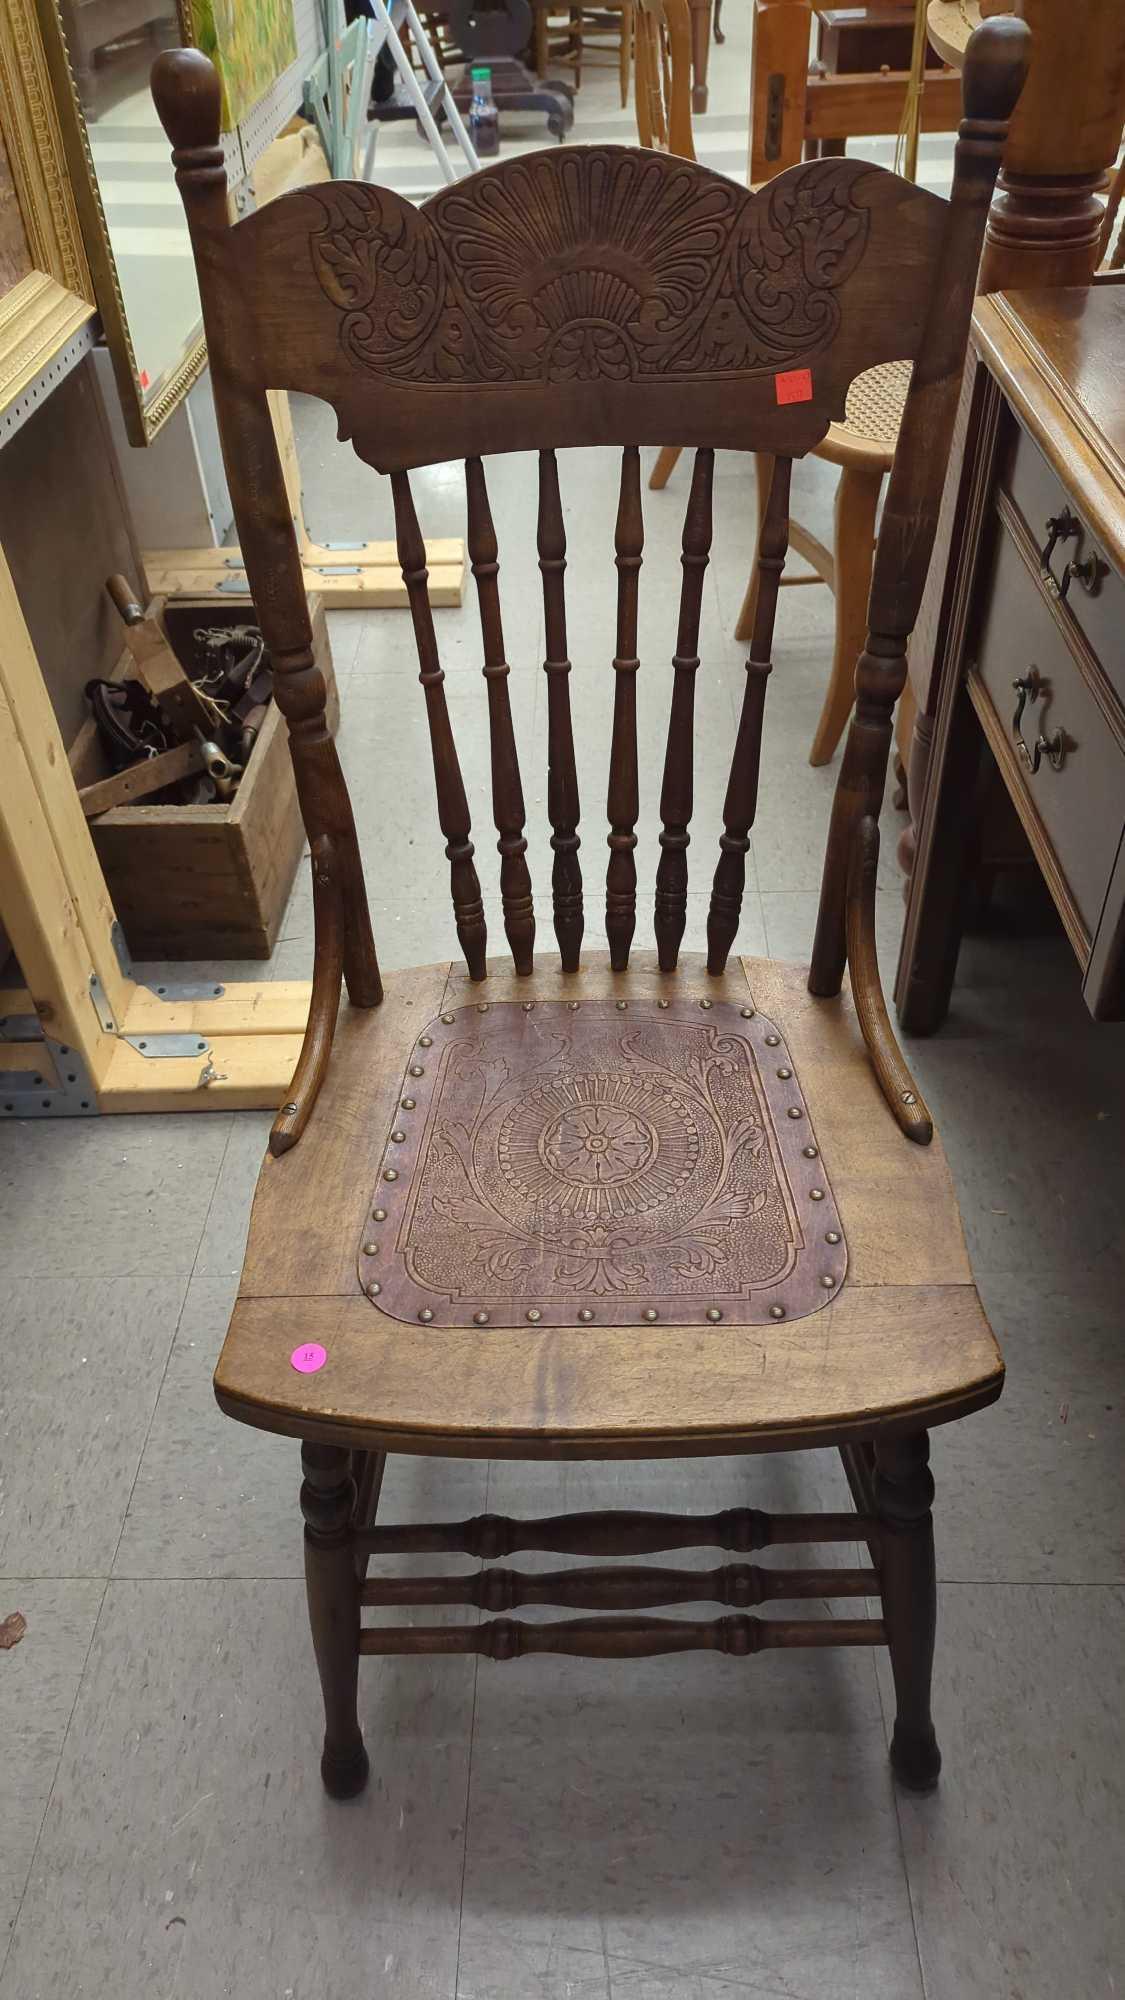 EARLY STYLE WOODEN PRESS BACK DINING CHAIR WITH A PRESS BOTTOM, BOTTOM HAS NAIL HEAD TRIM AROUND